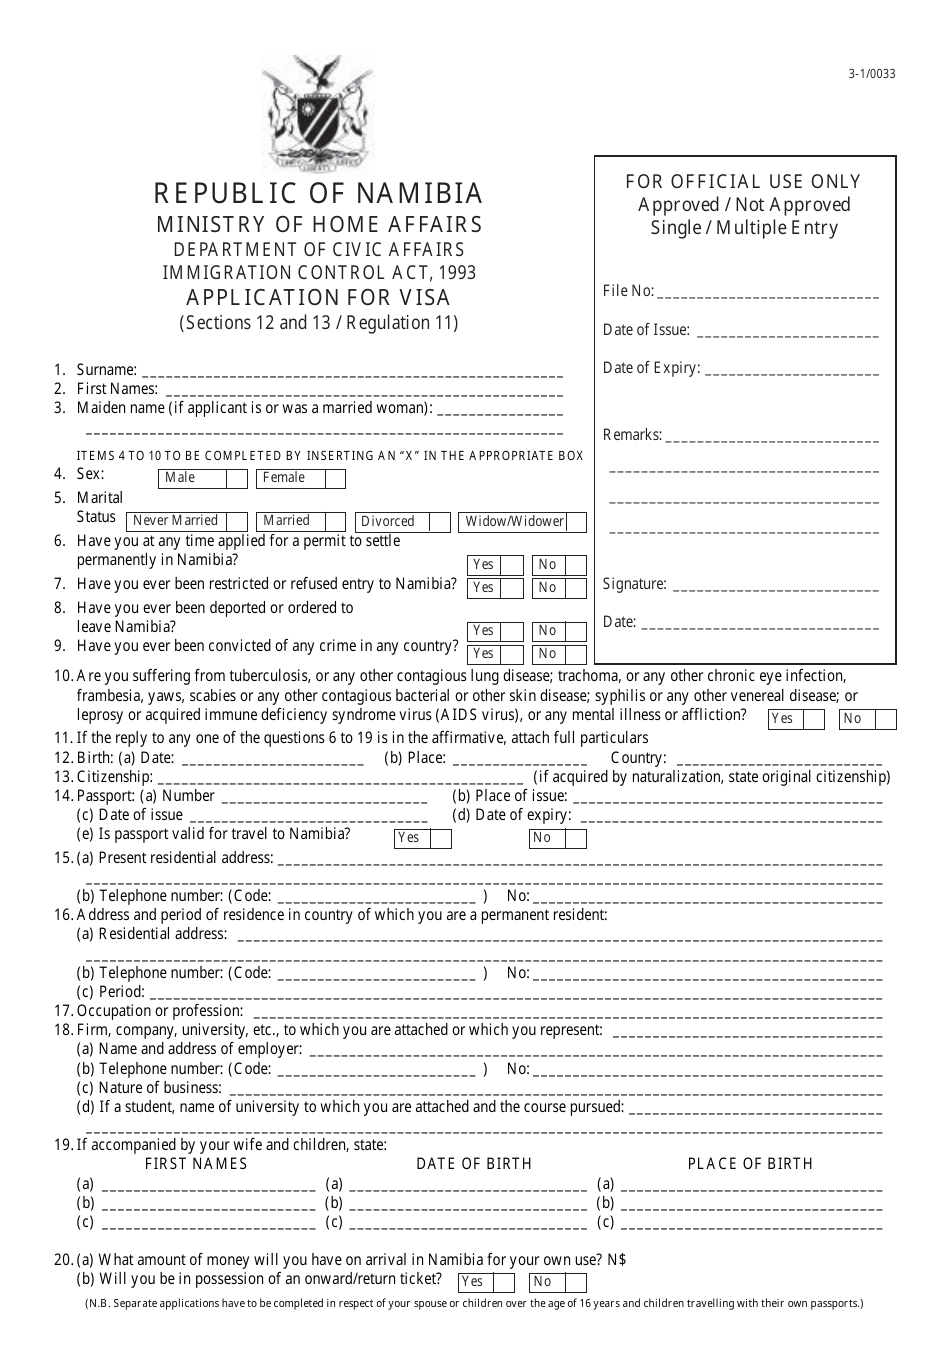 Form 3-1 / 0033 Application for Visa - Namibia, Page 1